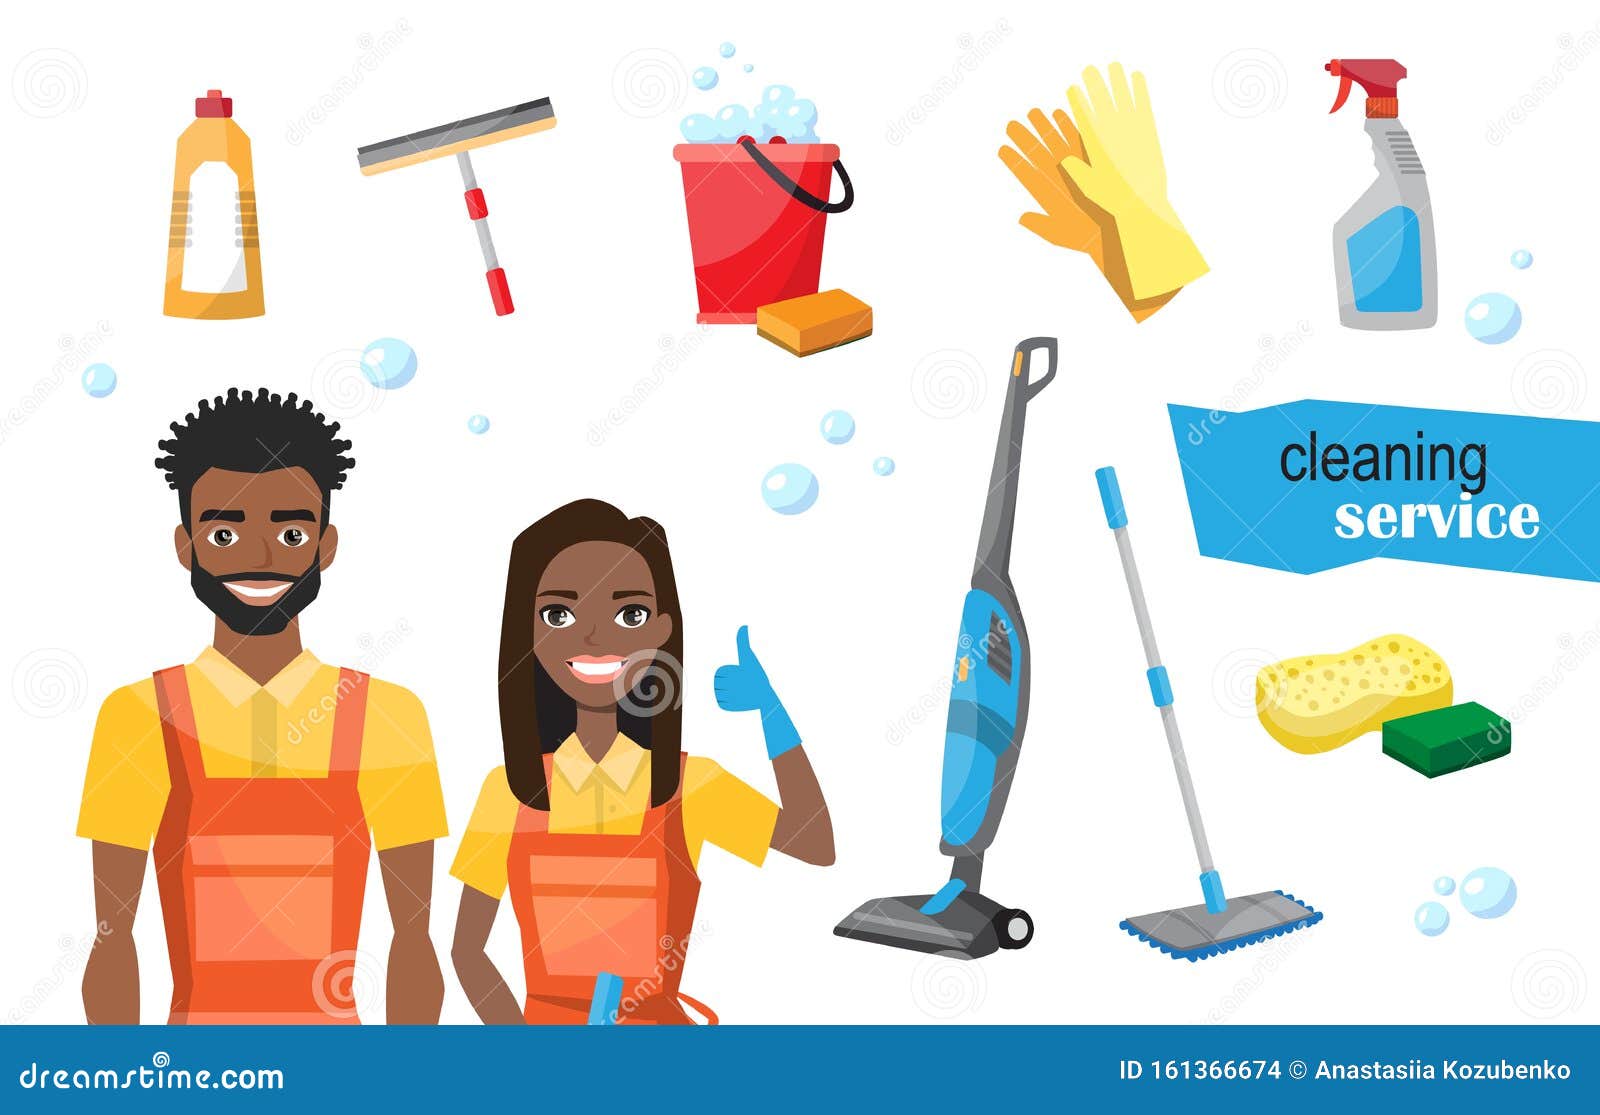 Professional Cleaners Team. Young Smiling Couple Are Holding Cleaning